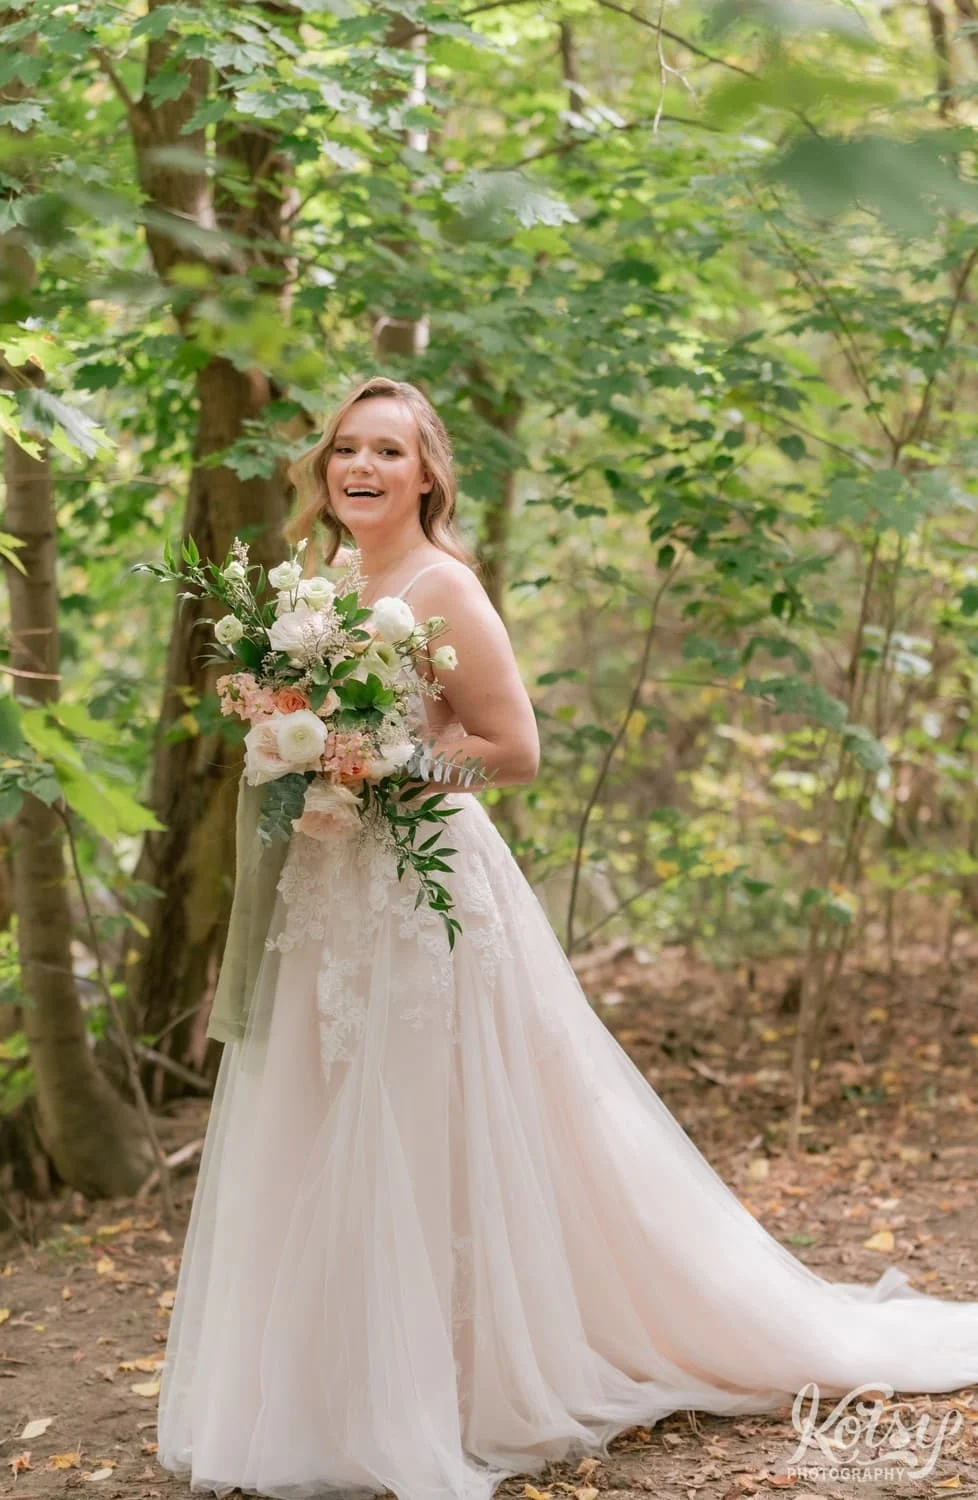 A bride holding a flower bouquet and wearing a white bridle of gown poses for a photo on a dirt leaf covered half at West Deane Park in Toronto, Canada